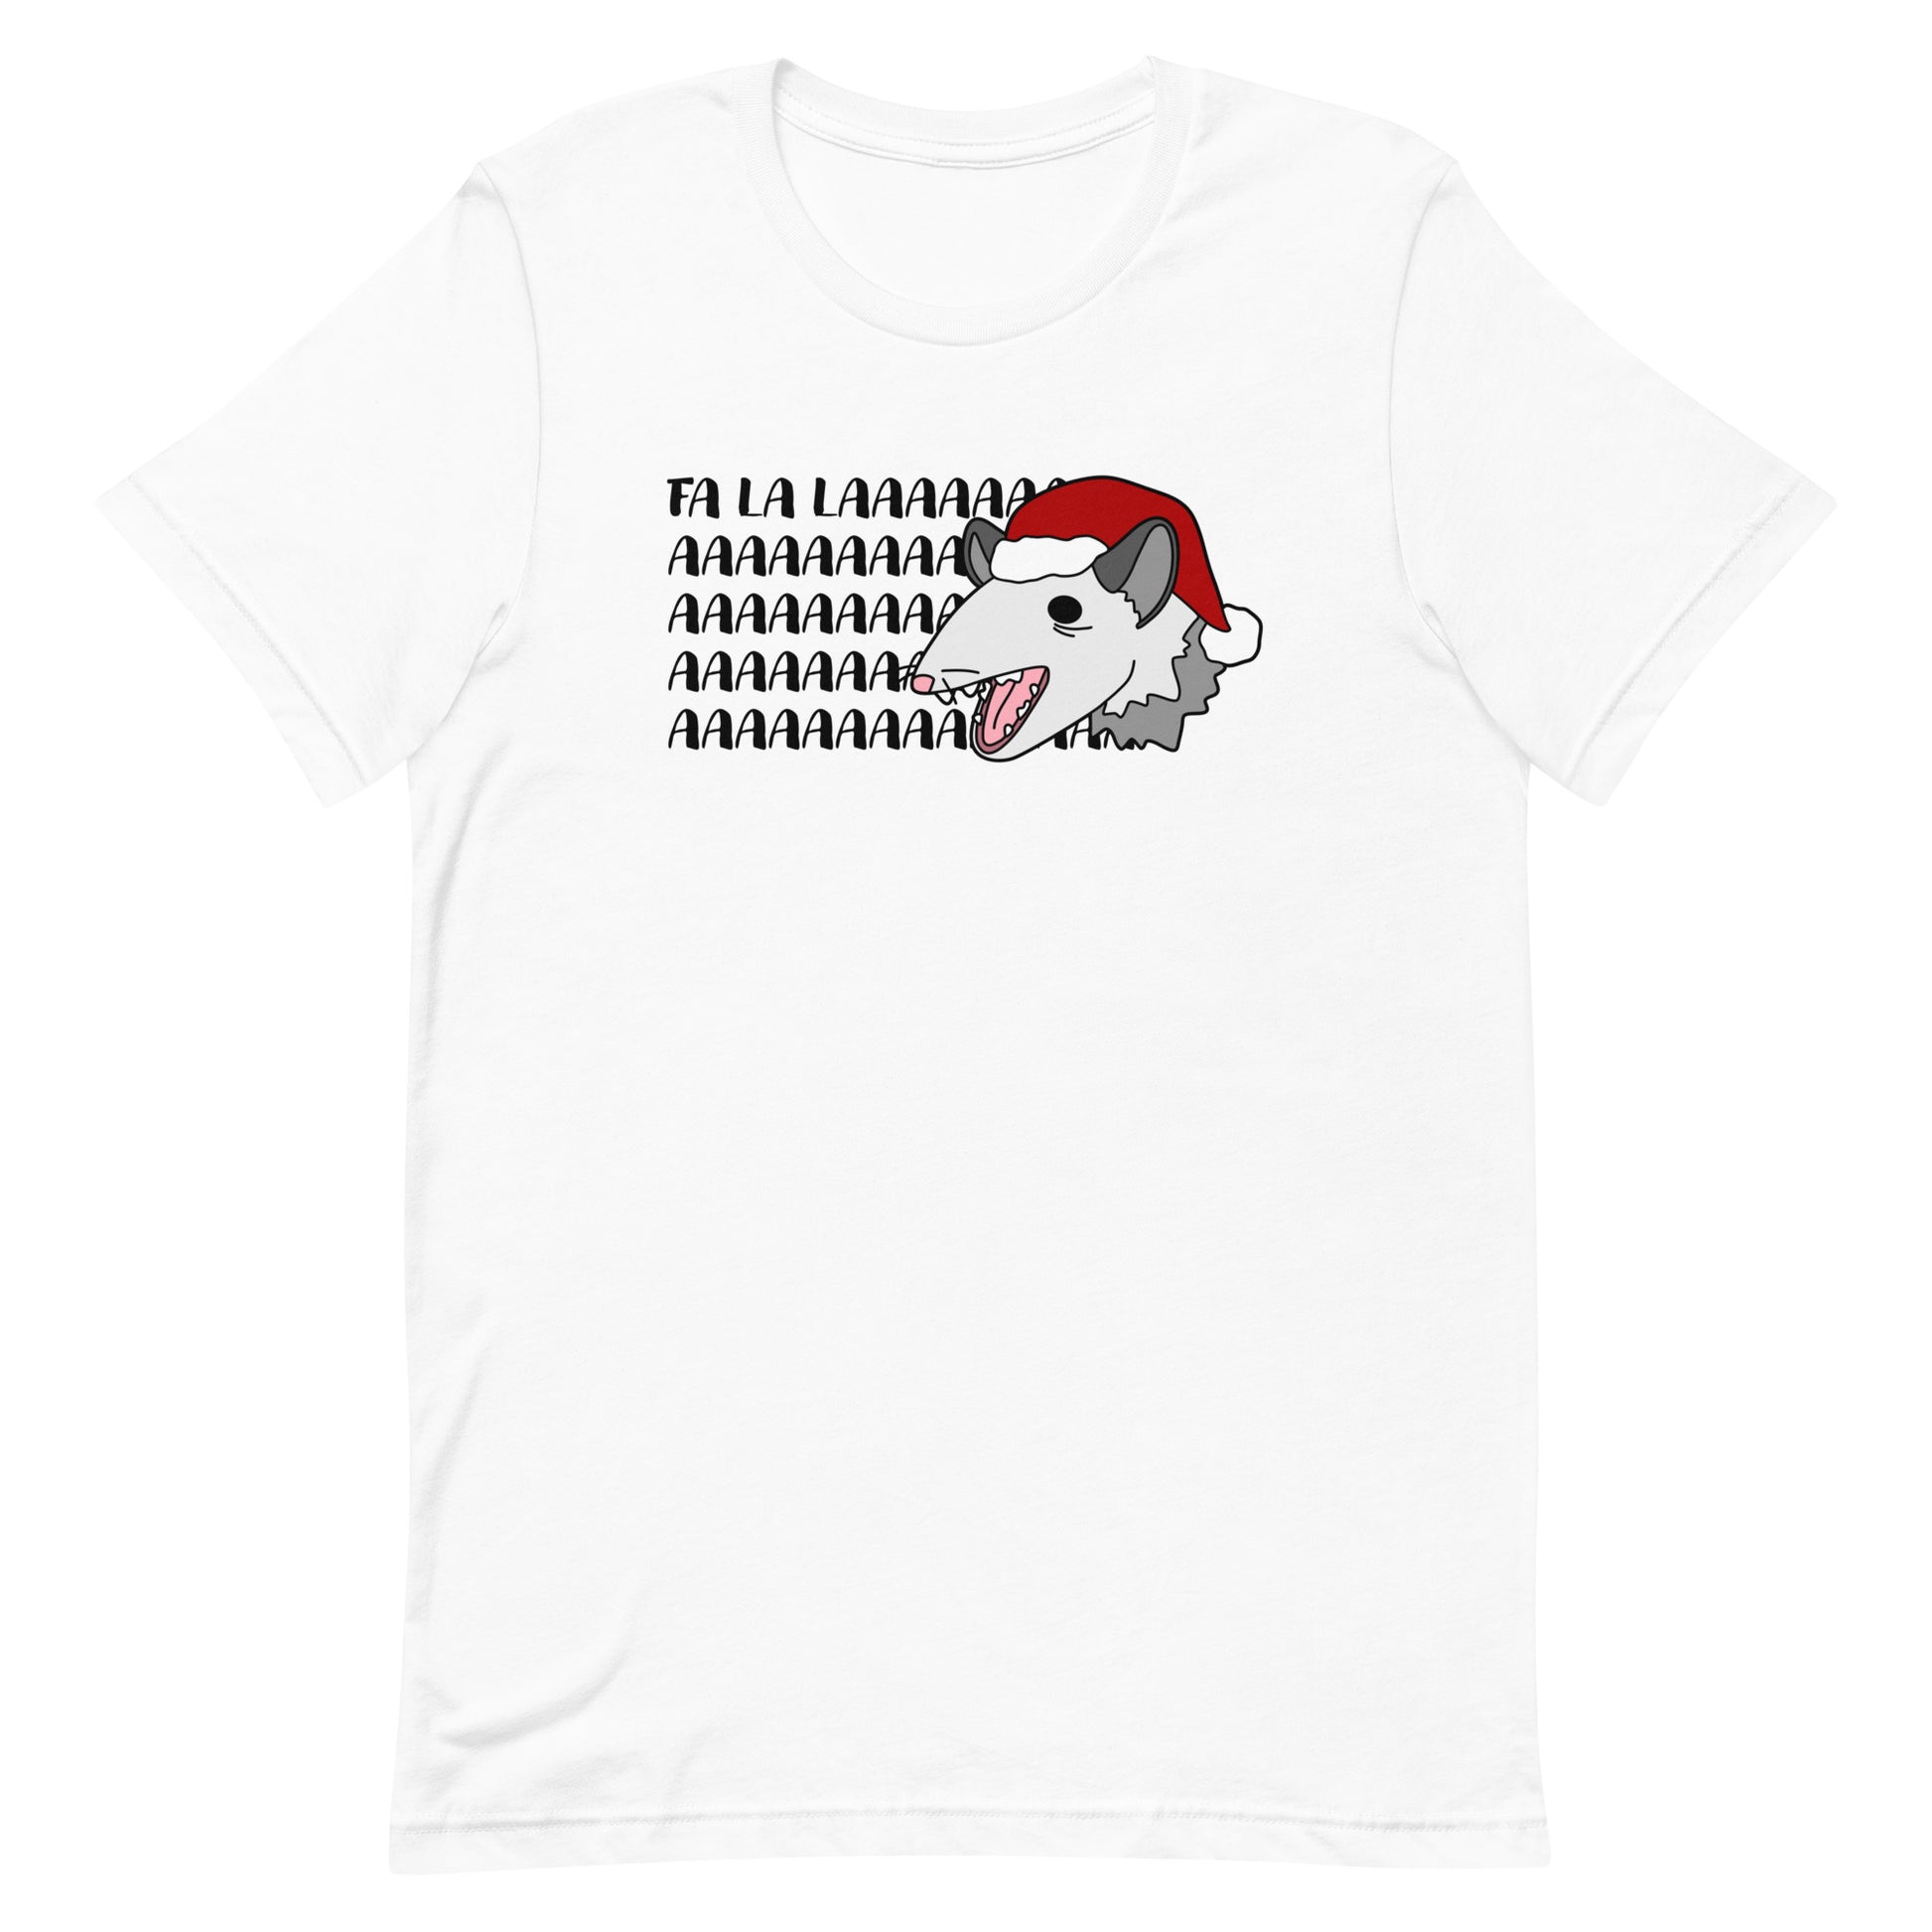 A white crewneck t-shirt featuring an illustration of a possum wearing a Santa hat. The possum appears to be screaming, and text behind his head reads "FA LA LAAAAAA"